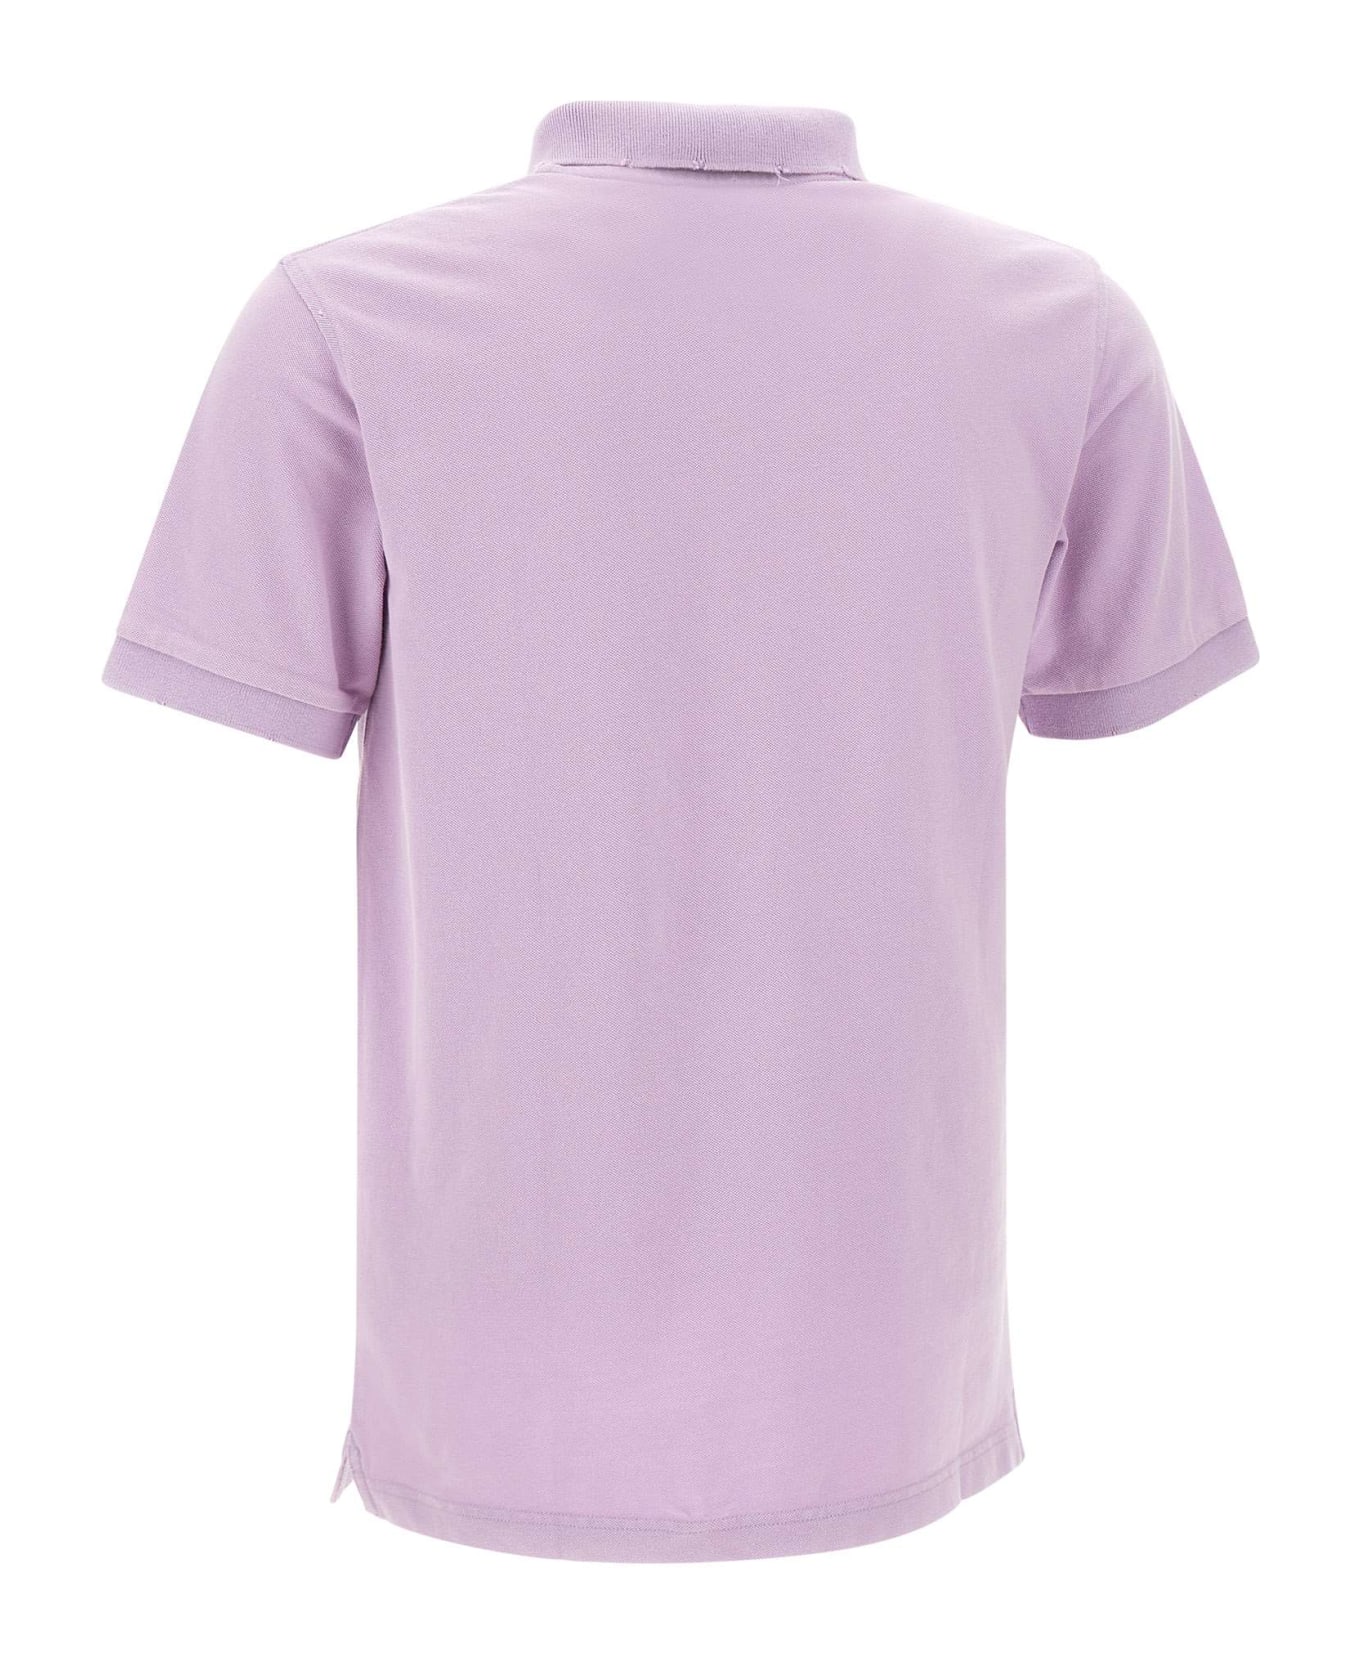 Sun 68 "solid" Polo Shirt Cotton - LILAC ポロシャツ